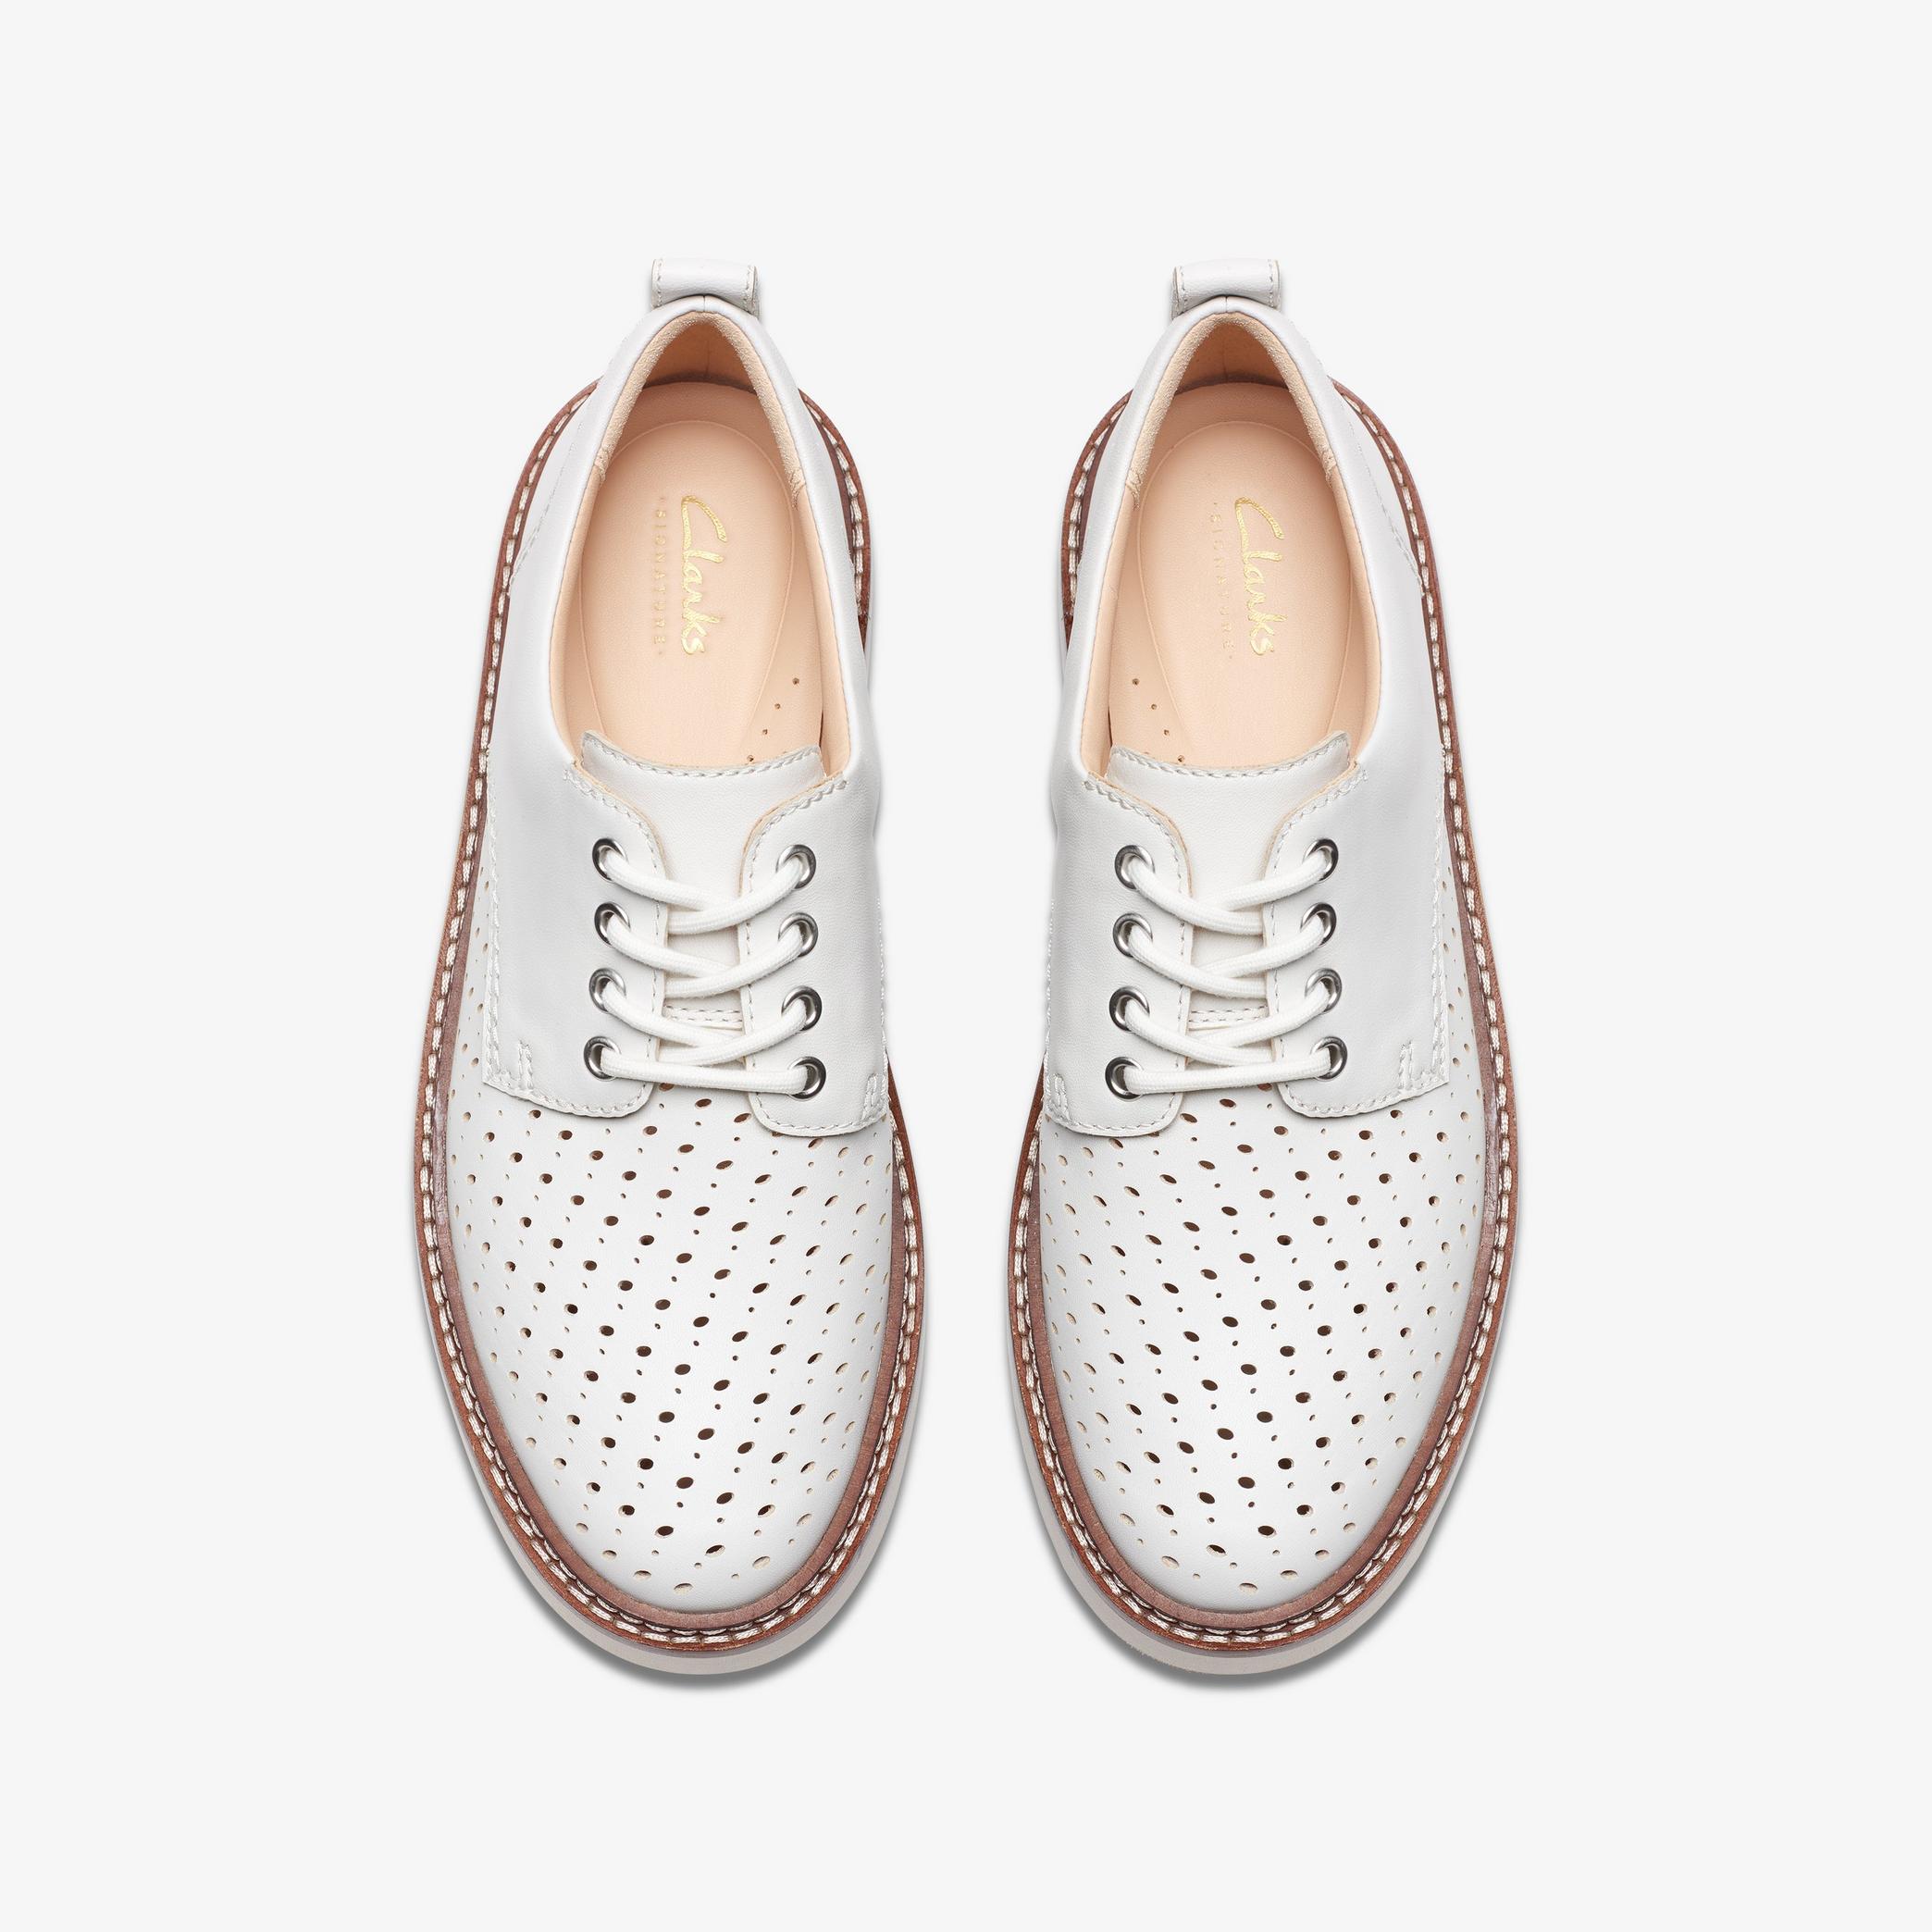 Orianna Move Off White Leather Loafers, view 6 of 6